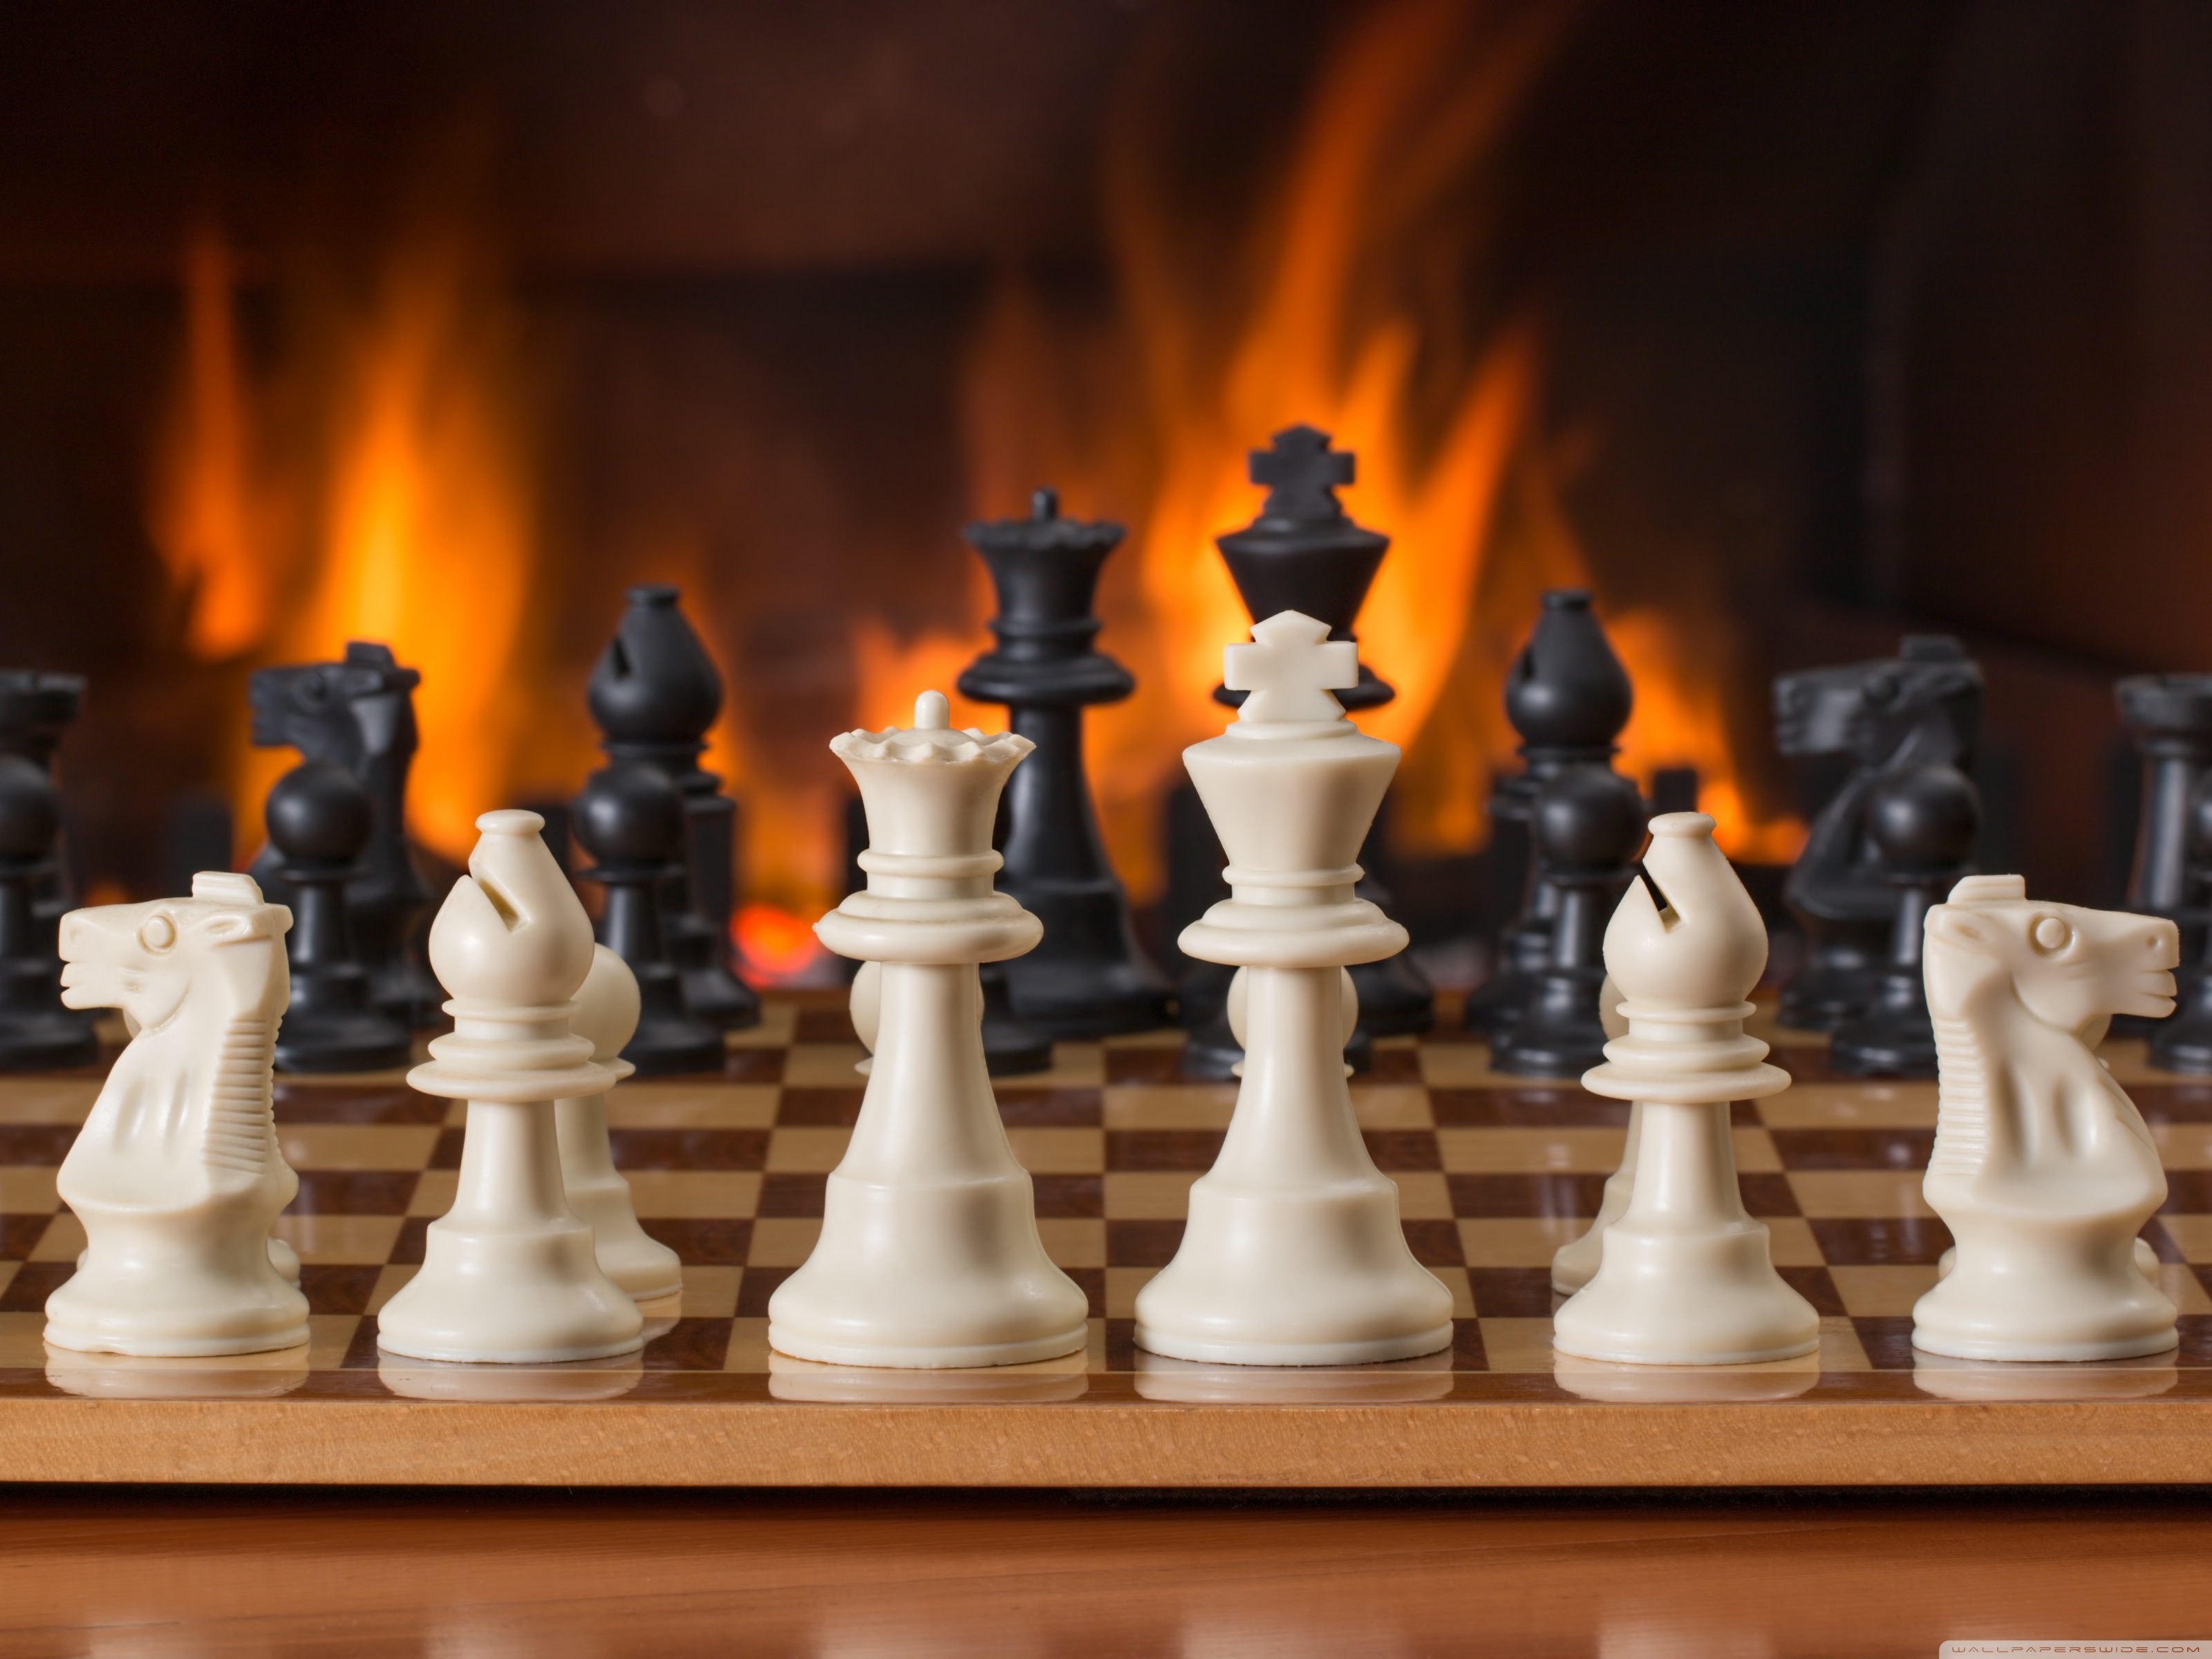 2,600+ Wallpaper Chess Stock Videos and Royalty-Free Footage - iStock